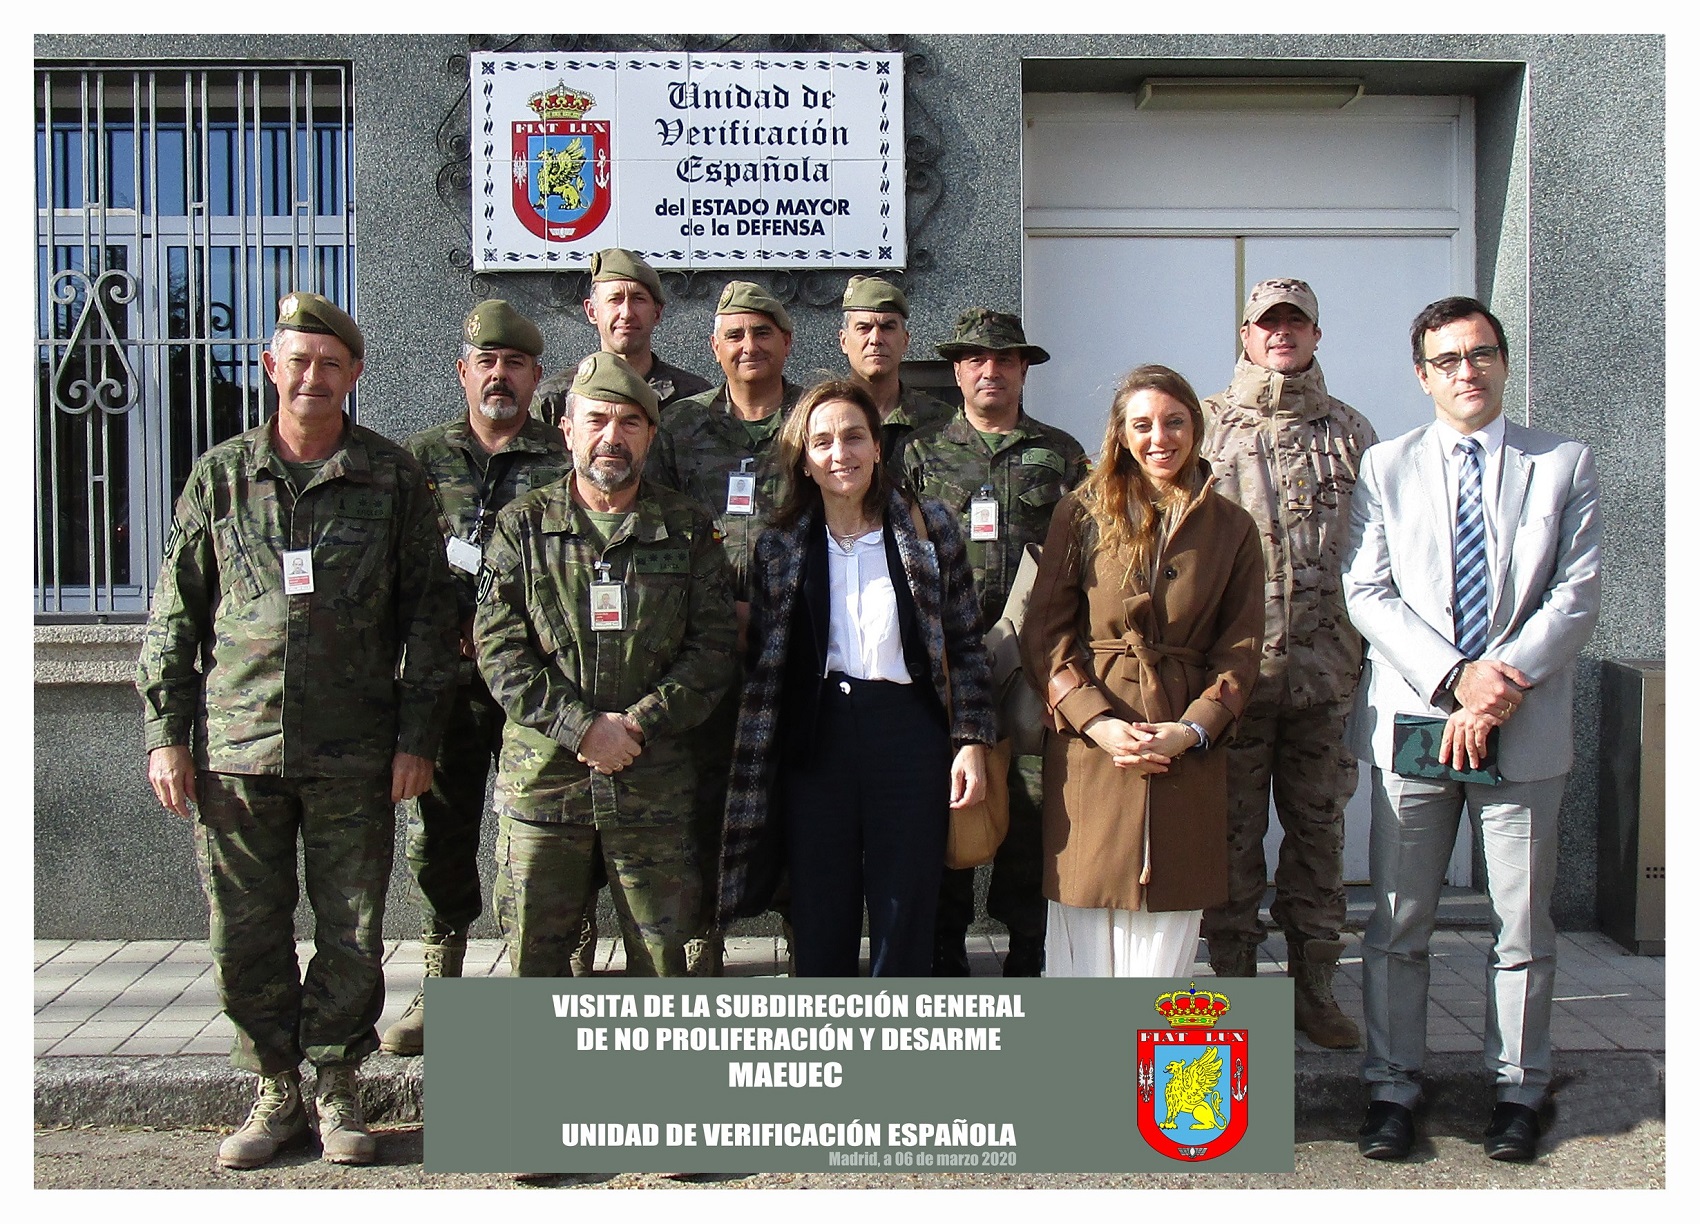 Deputy Director General for Non-Proliferation and Disarment visits Spanish Verification Unit